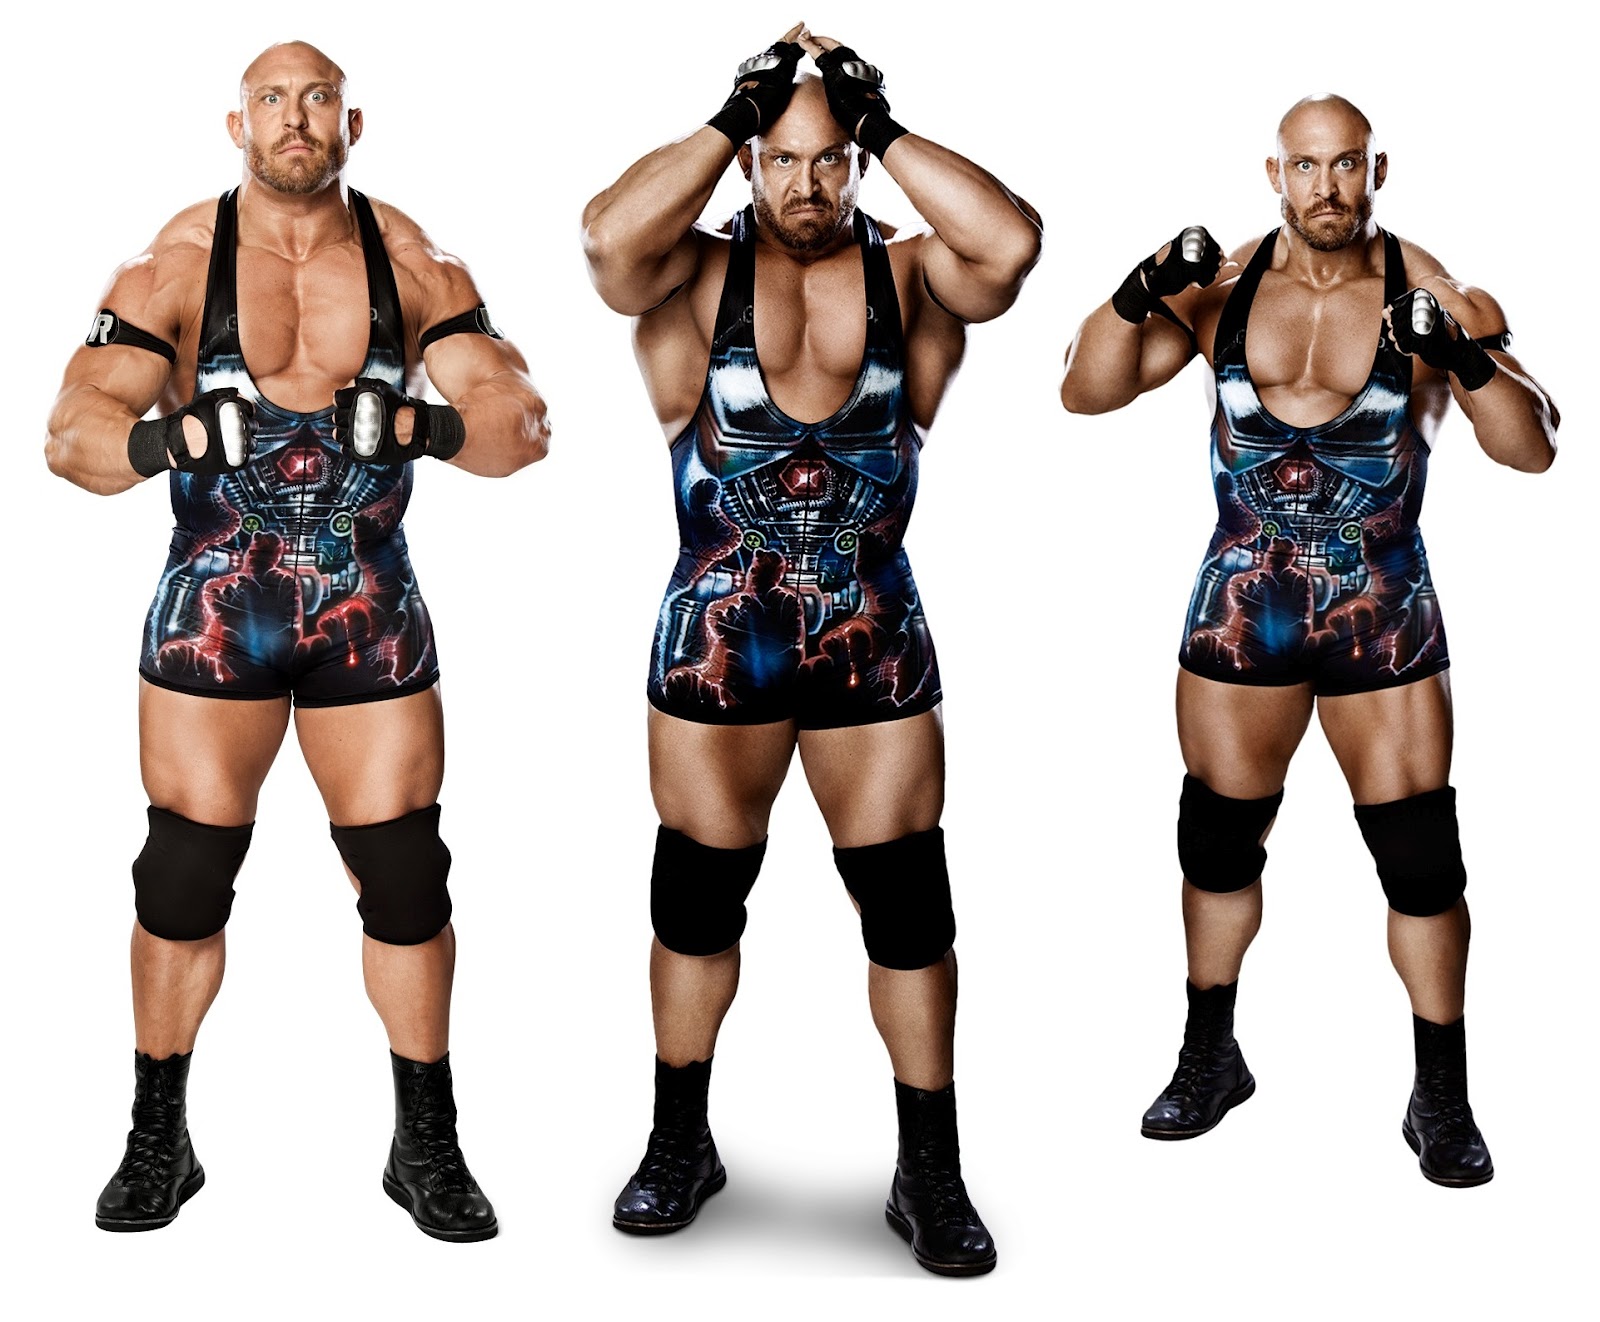 in a box with me: WWE Ryback New HD Wallpapers